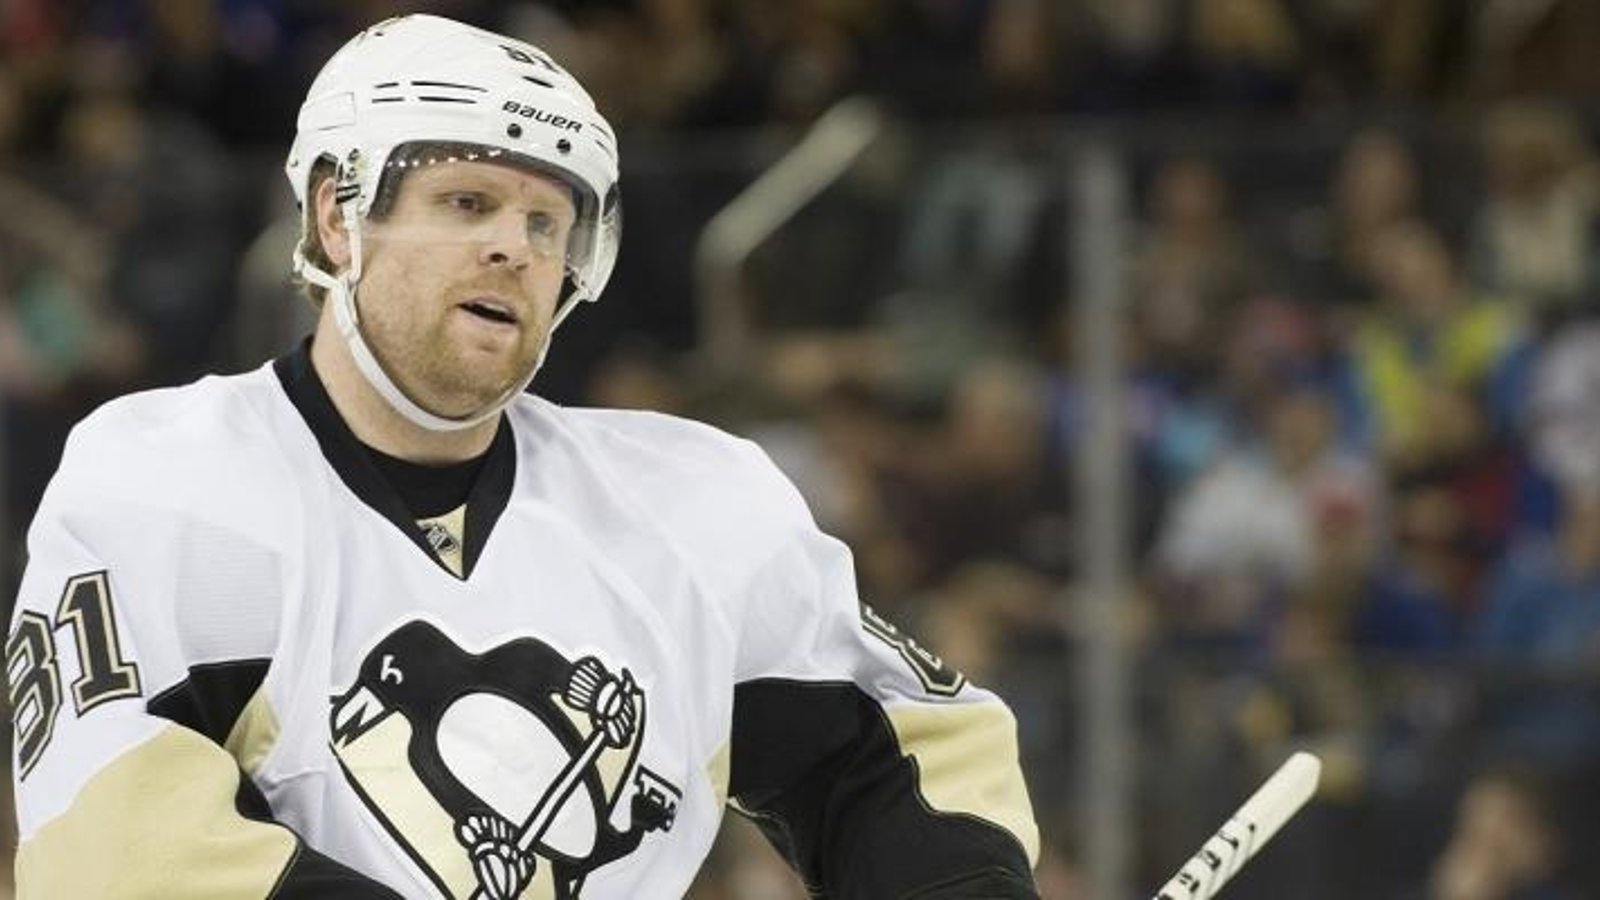 Kessel fulfills his promise to bring the Cup to Toronto in a very special way.